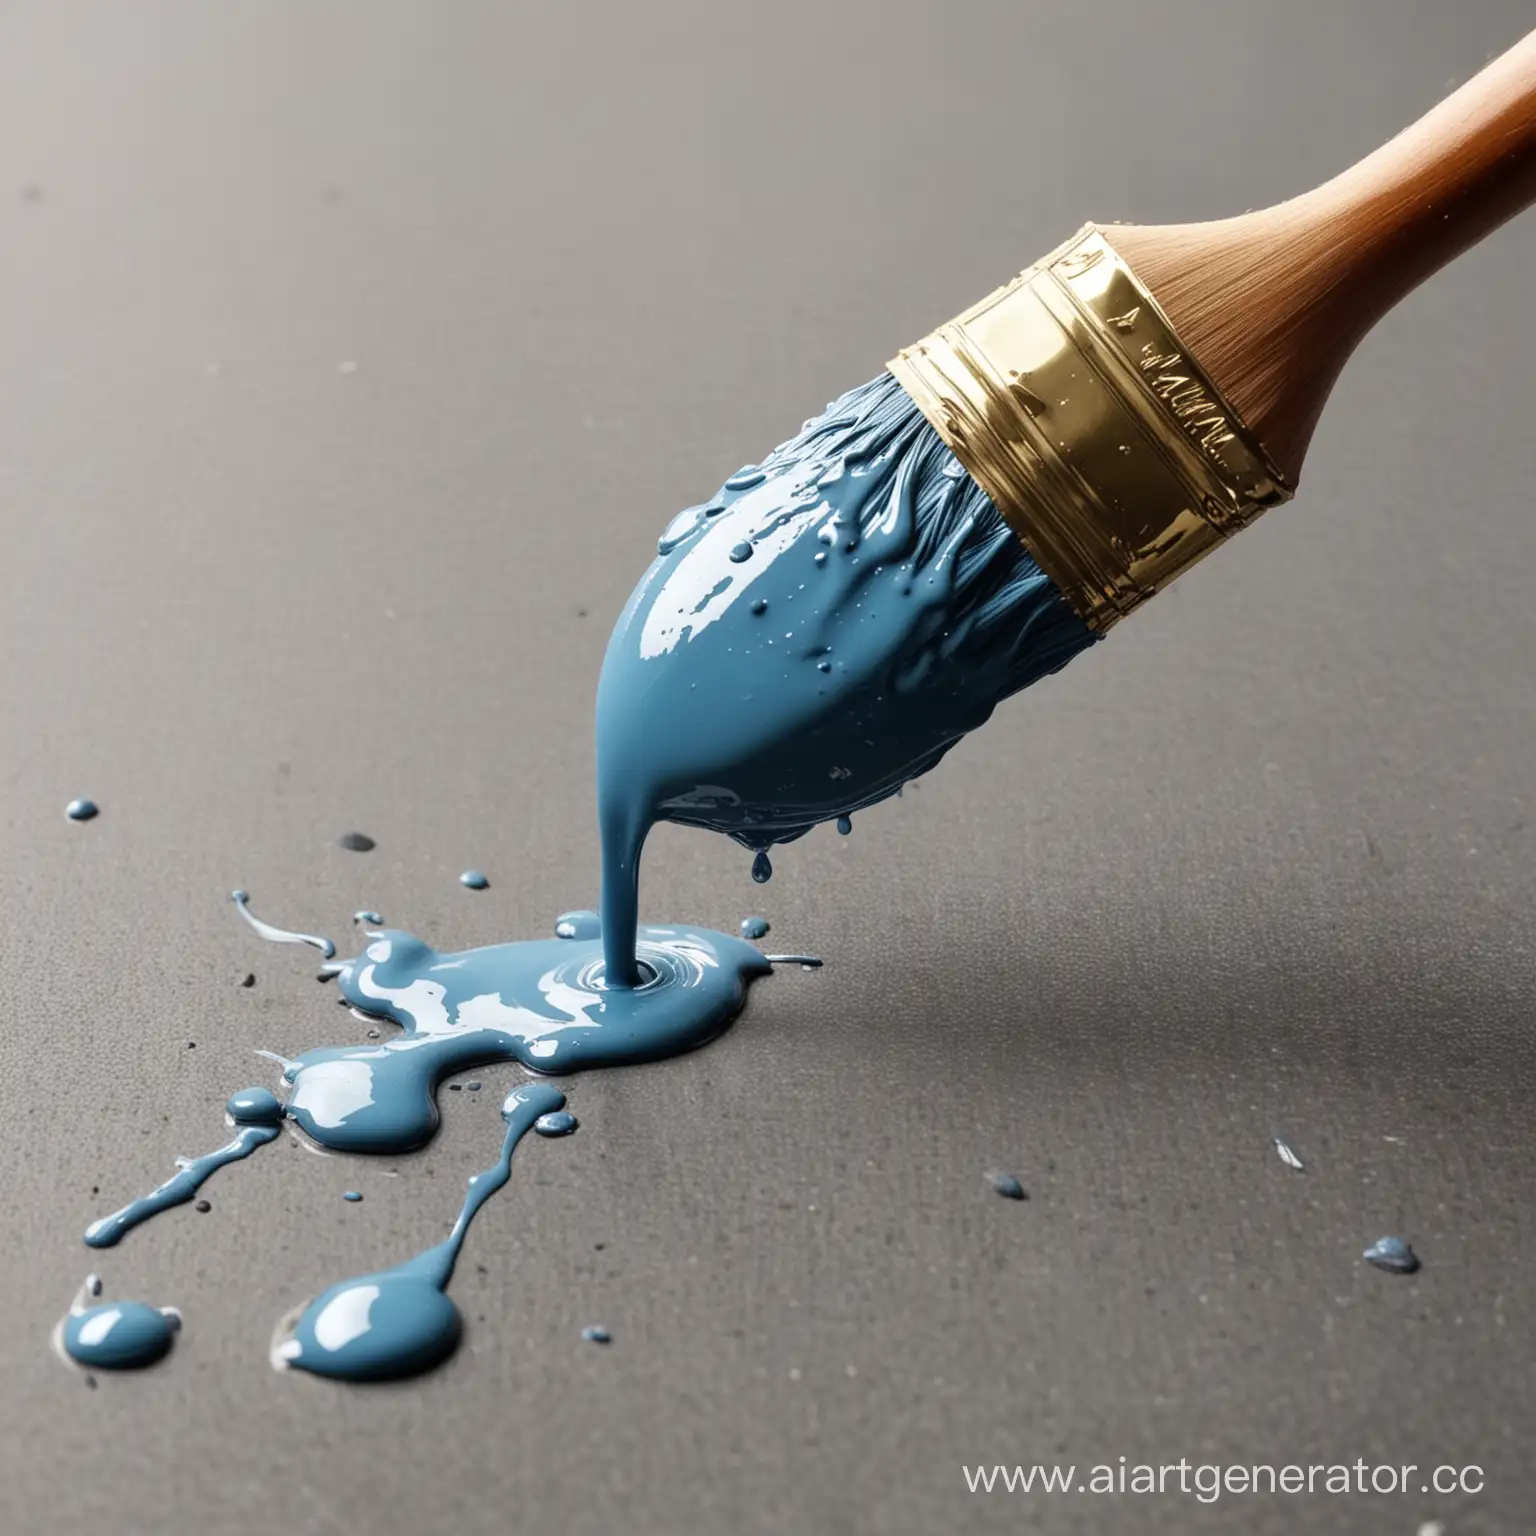 Artists-Brush-Dripping-Paint-Creative-Expression-in-Motion